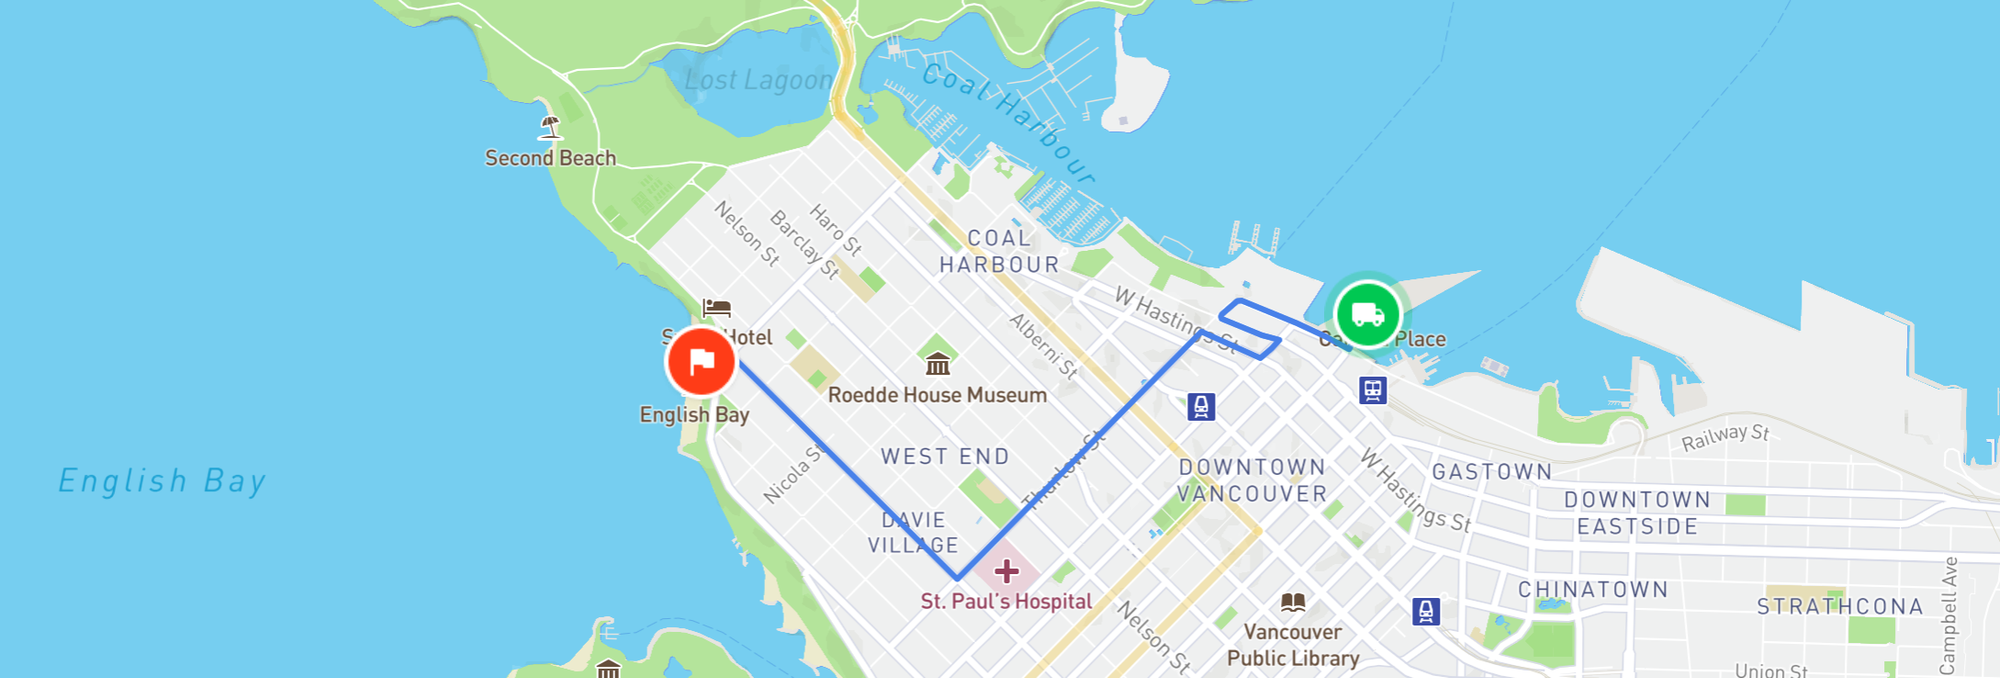 OSRM Route API: Free directions API with turn by turn directions and polylines